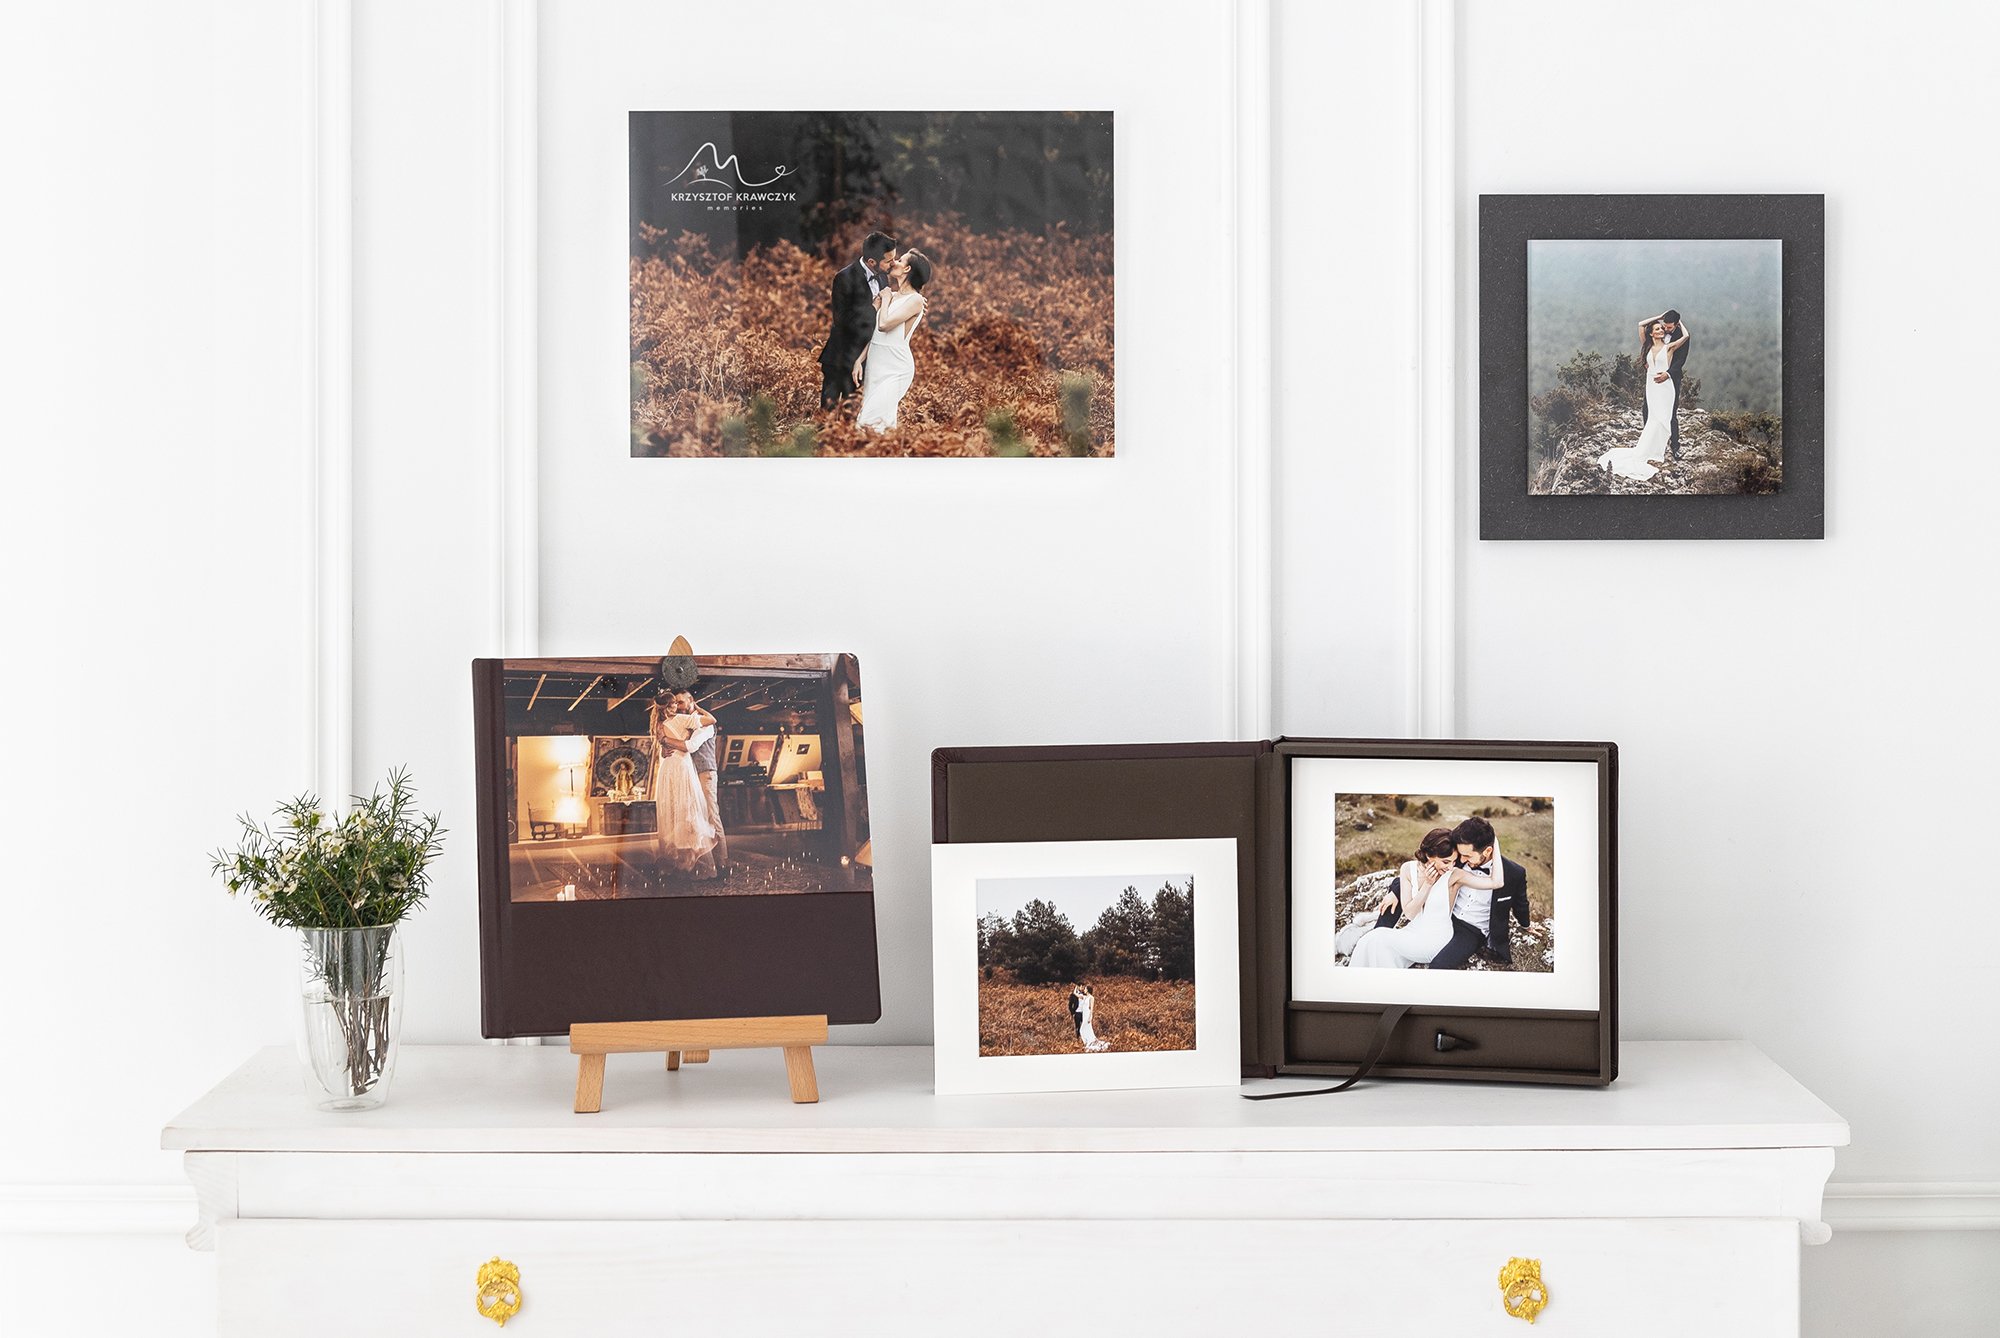 High quality print products displayed in a photo studio